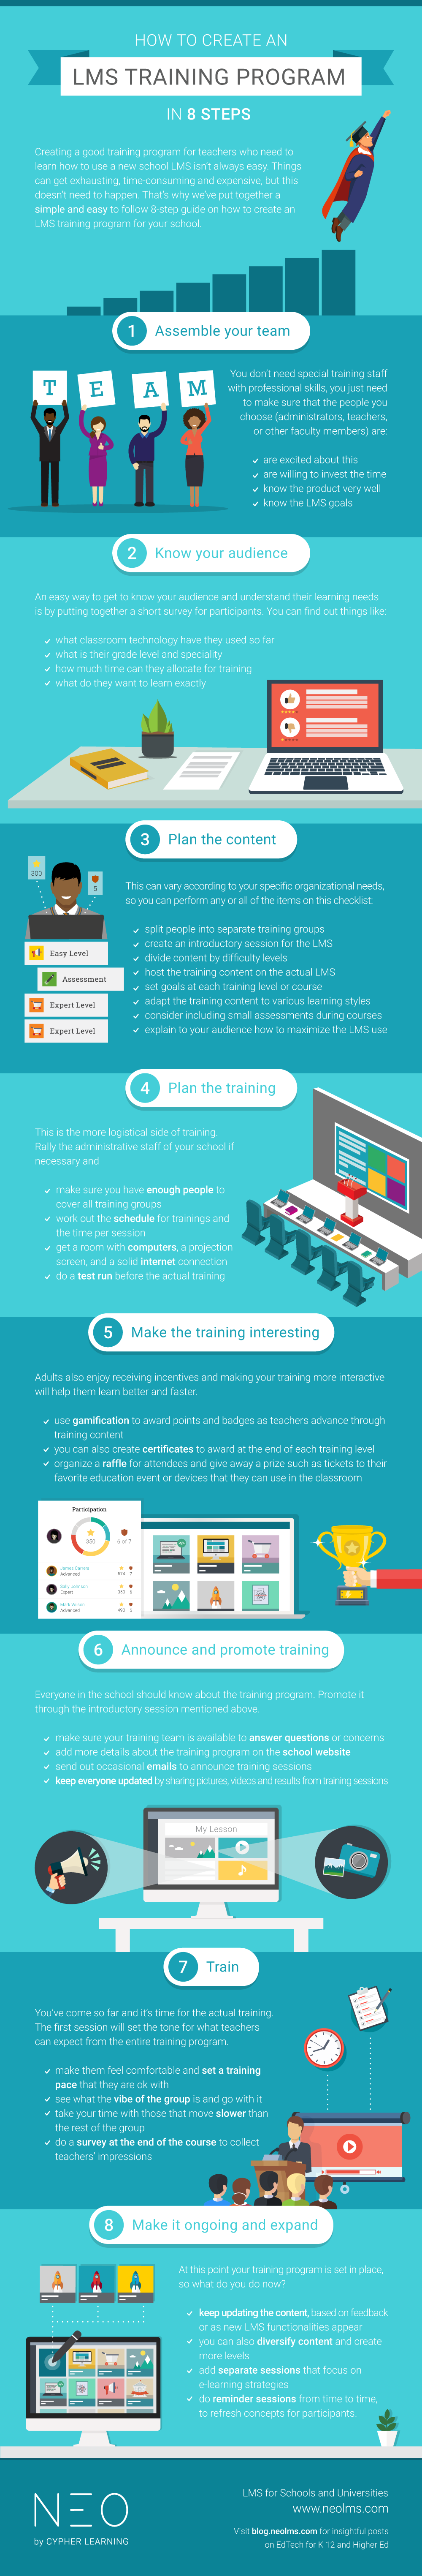 How to create an LMS training program in 8 steps INFOGRAPHIC